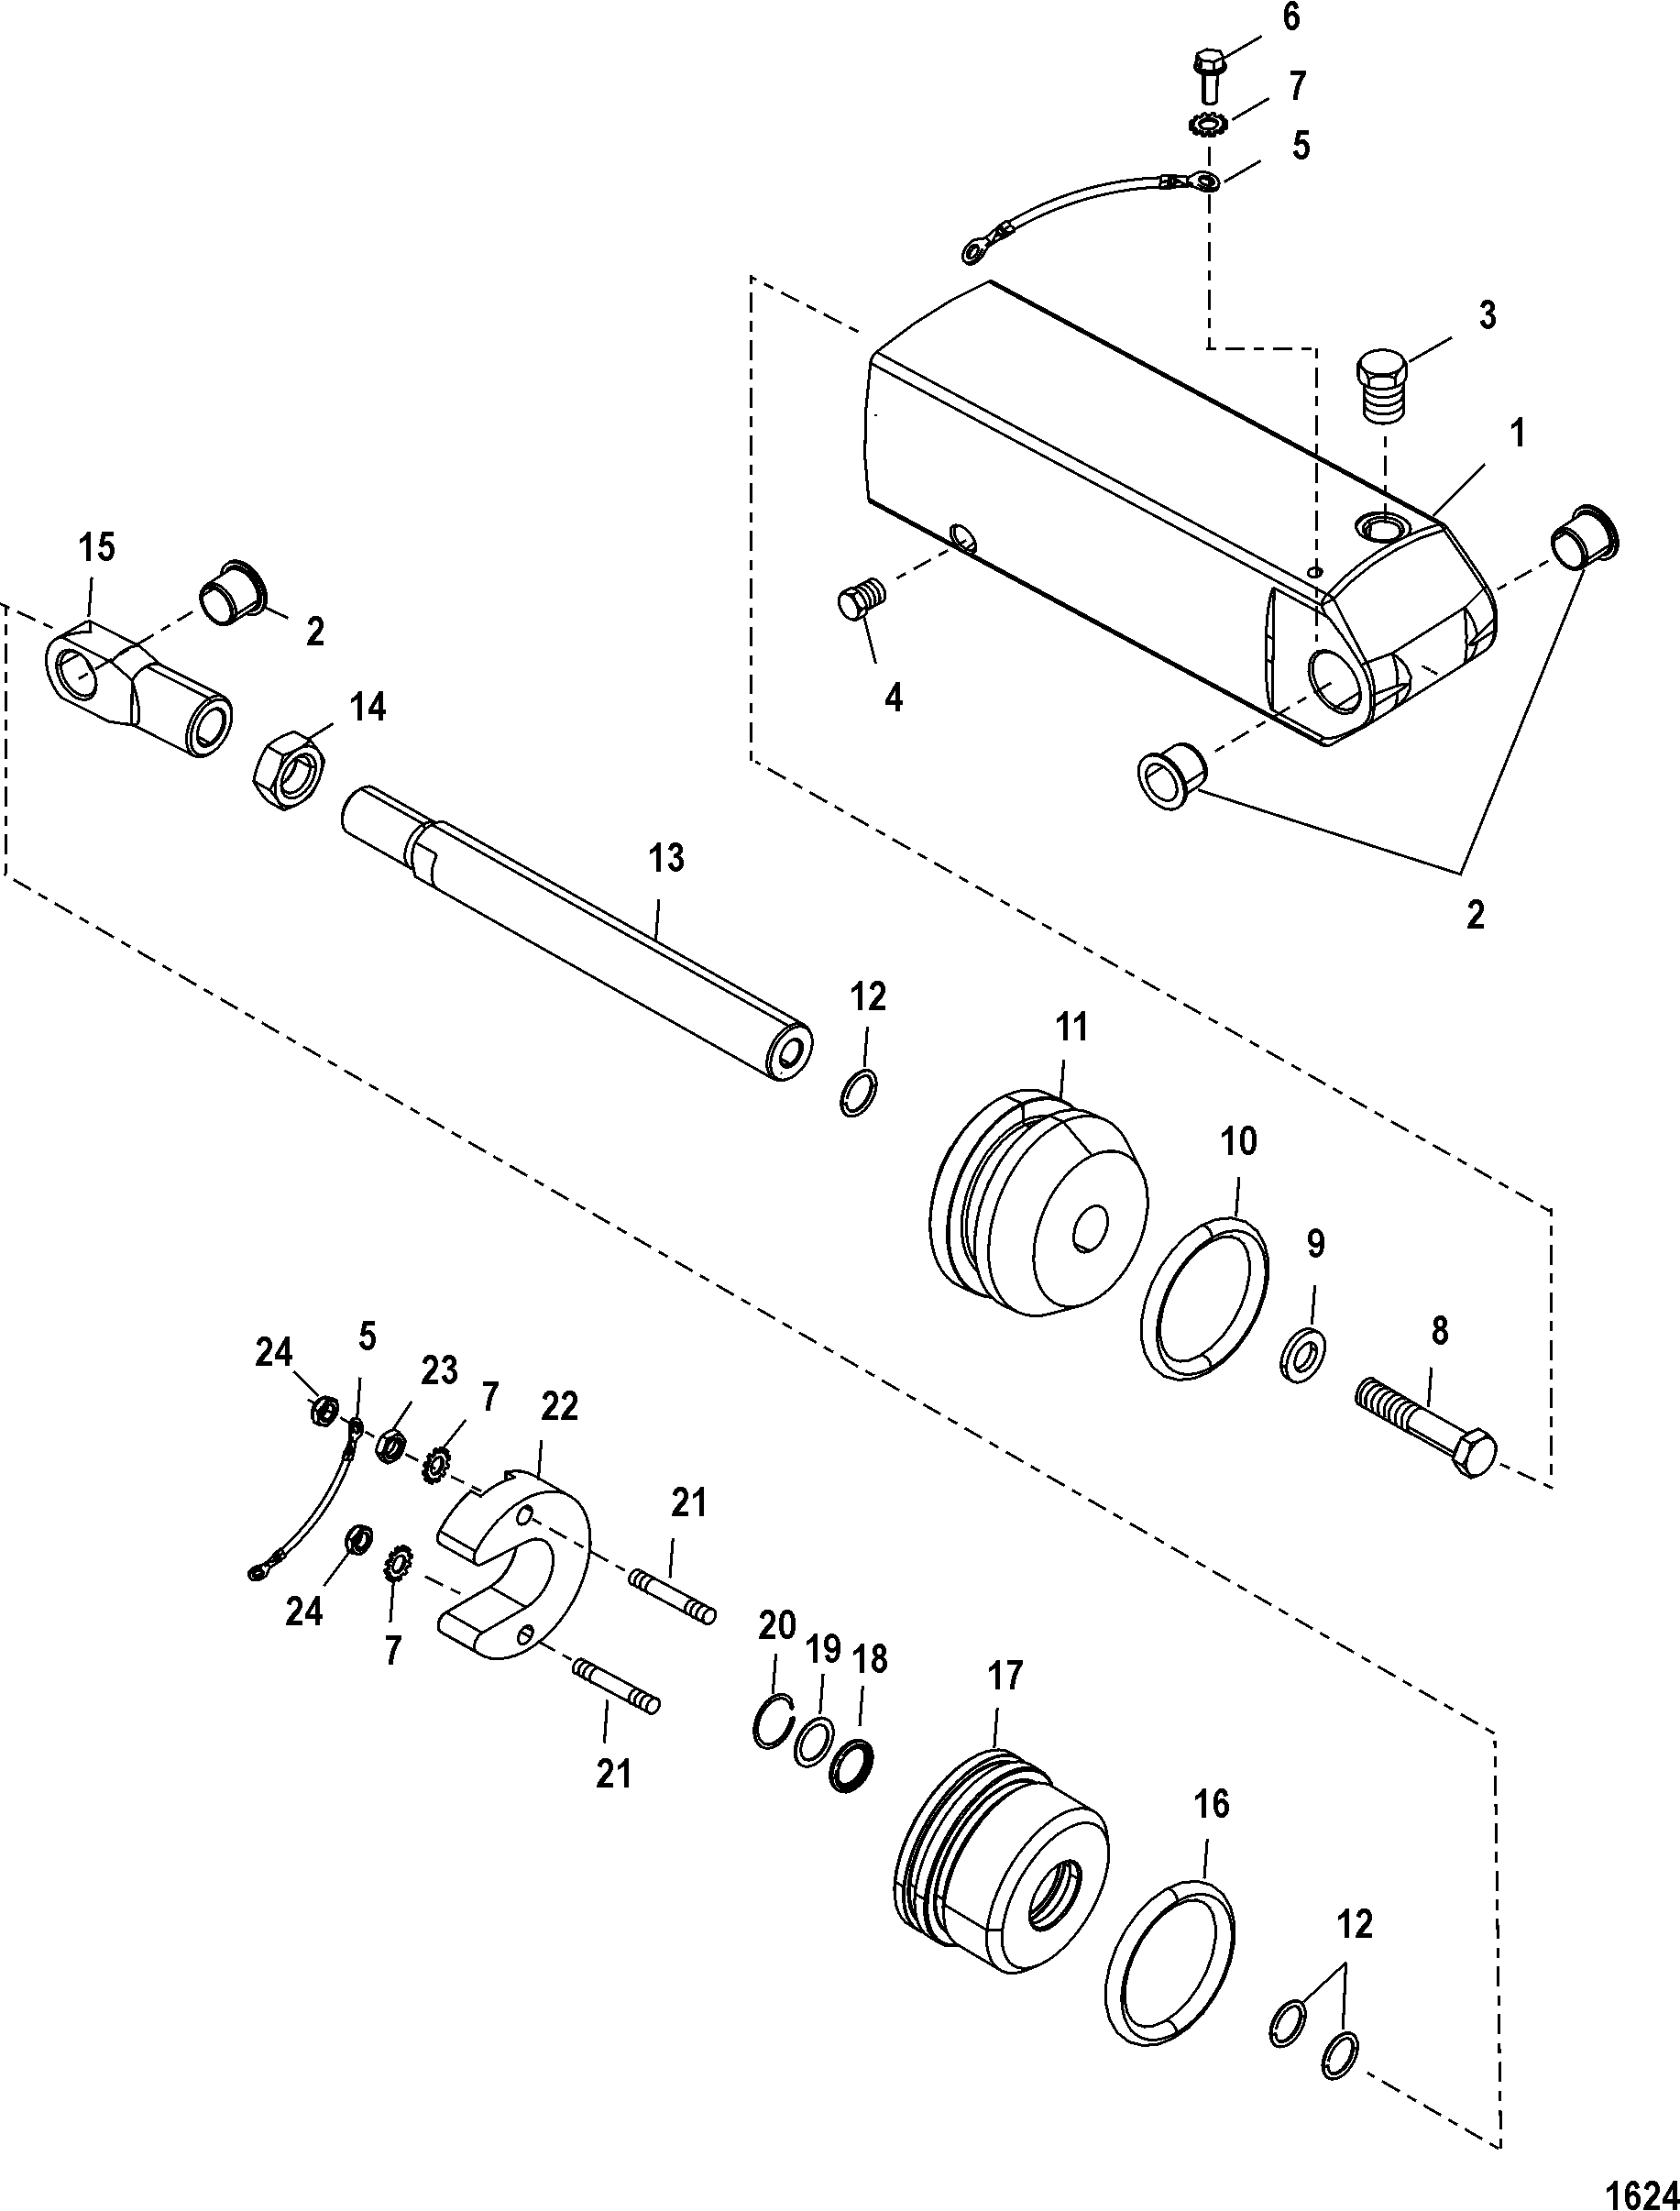 Steering Cylinder(Integrated Transom)